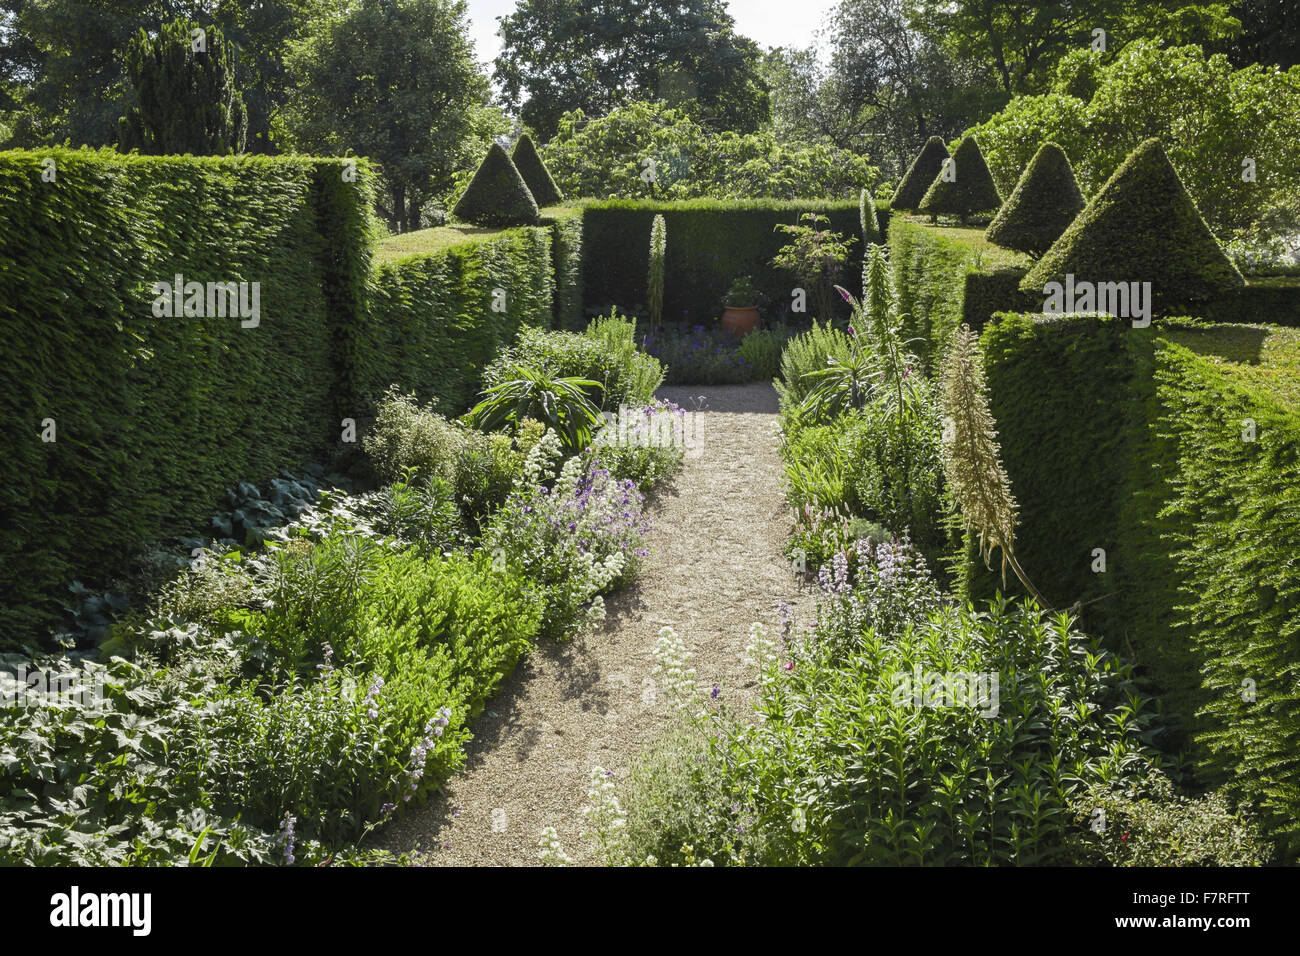 The garden at Fenton House and Garden, London. Fenton House was built in 1686 and is filled with world-class decorative and fine art collections. The gardens include an orchard, kitchen garden, rose garden and formal terraces and lawns. Stock Photo